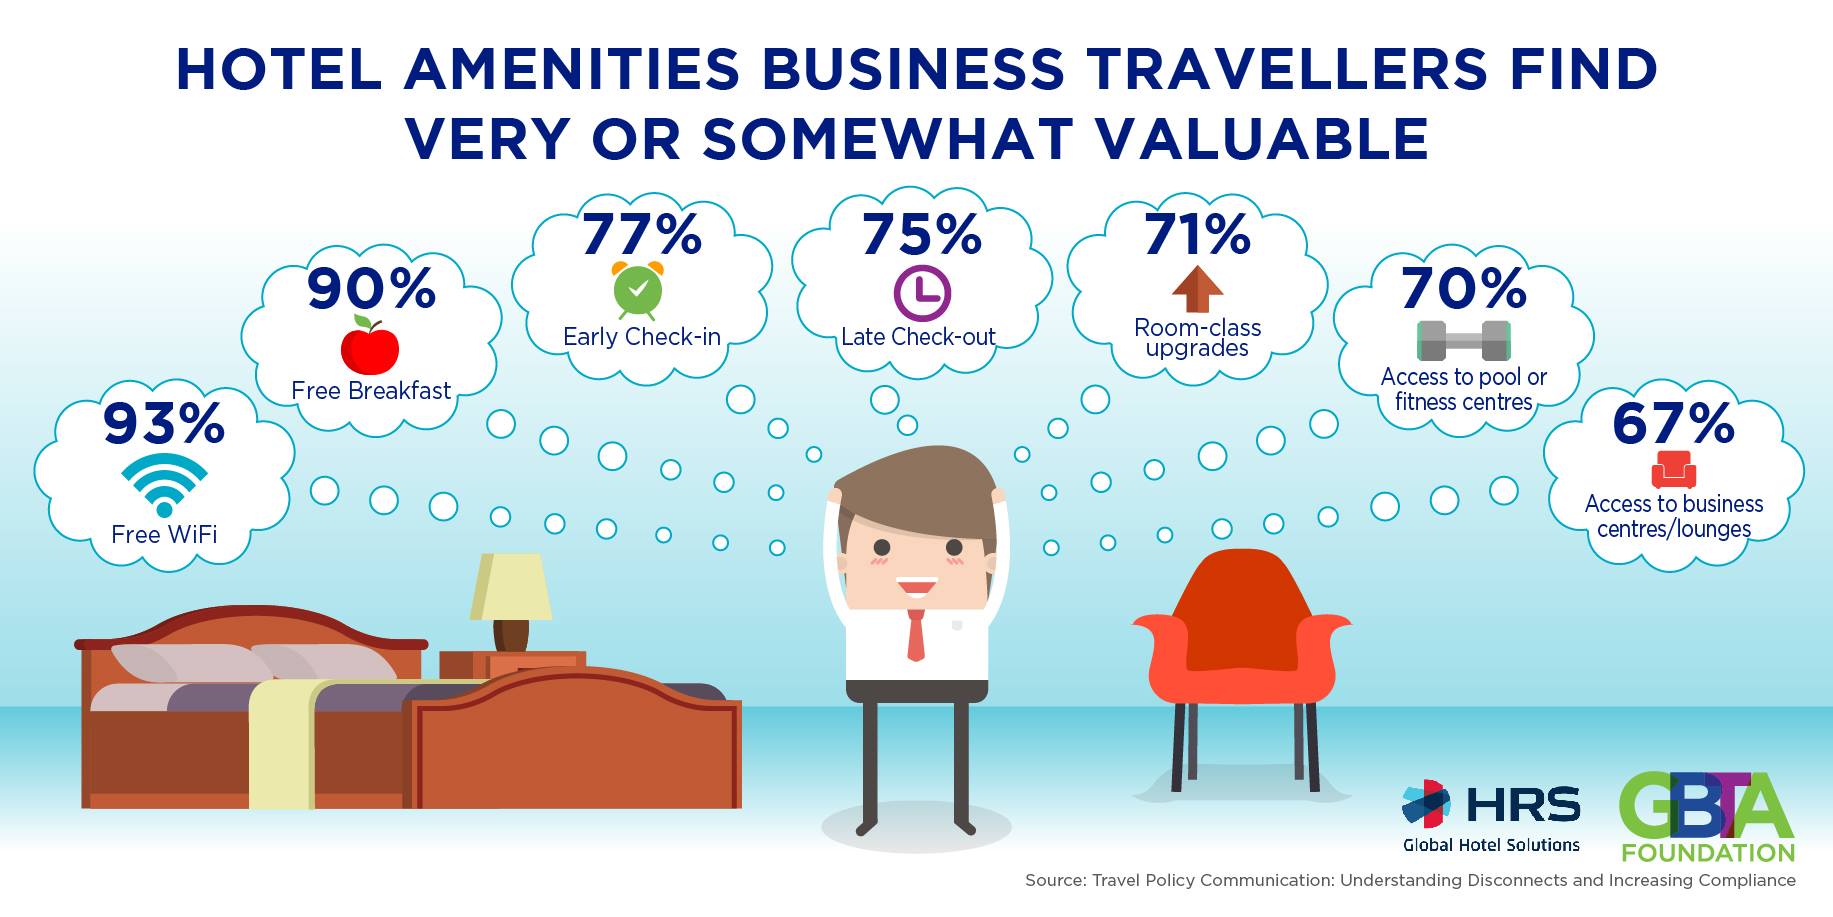 Business Traveller Perspectives on Company Travel Policies, Compliance and Valued Amenities, GBTA Report